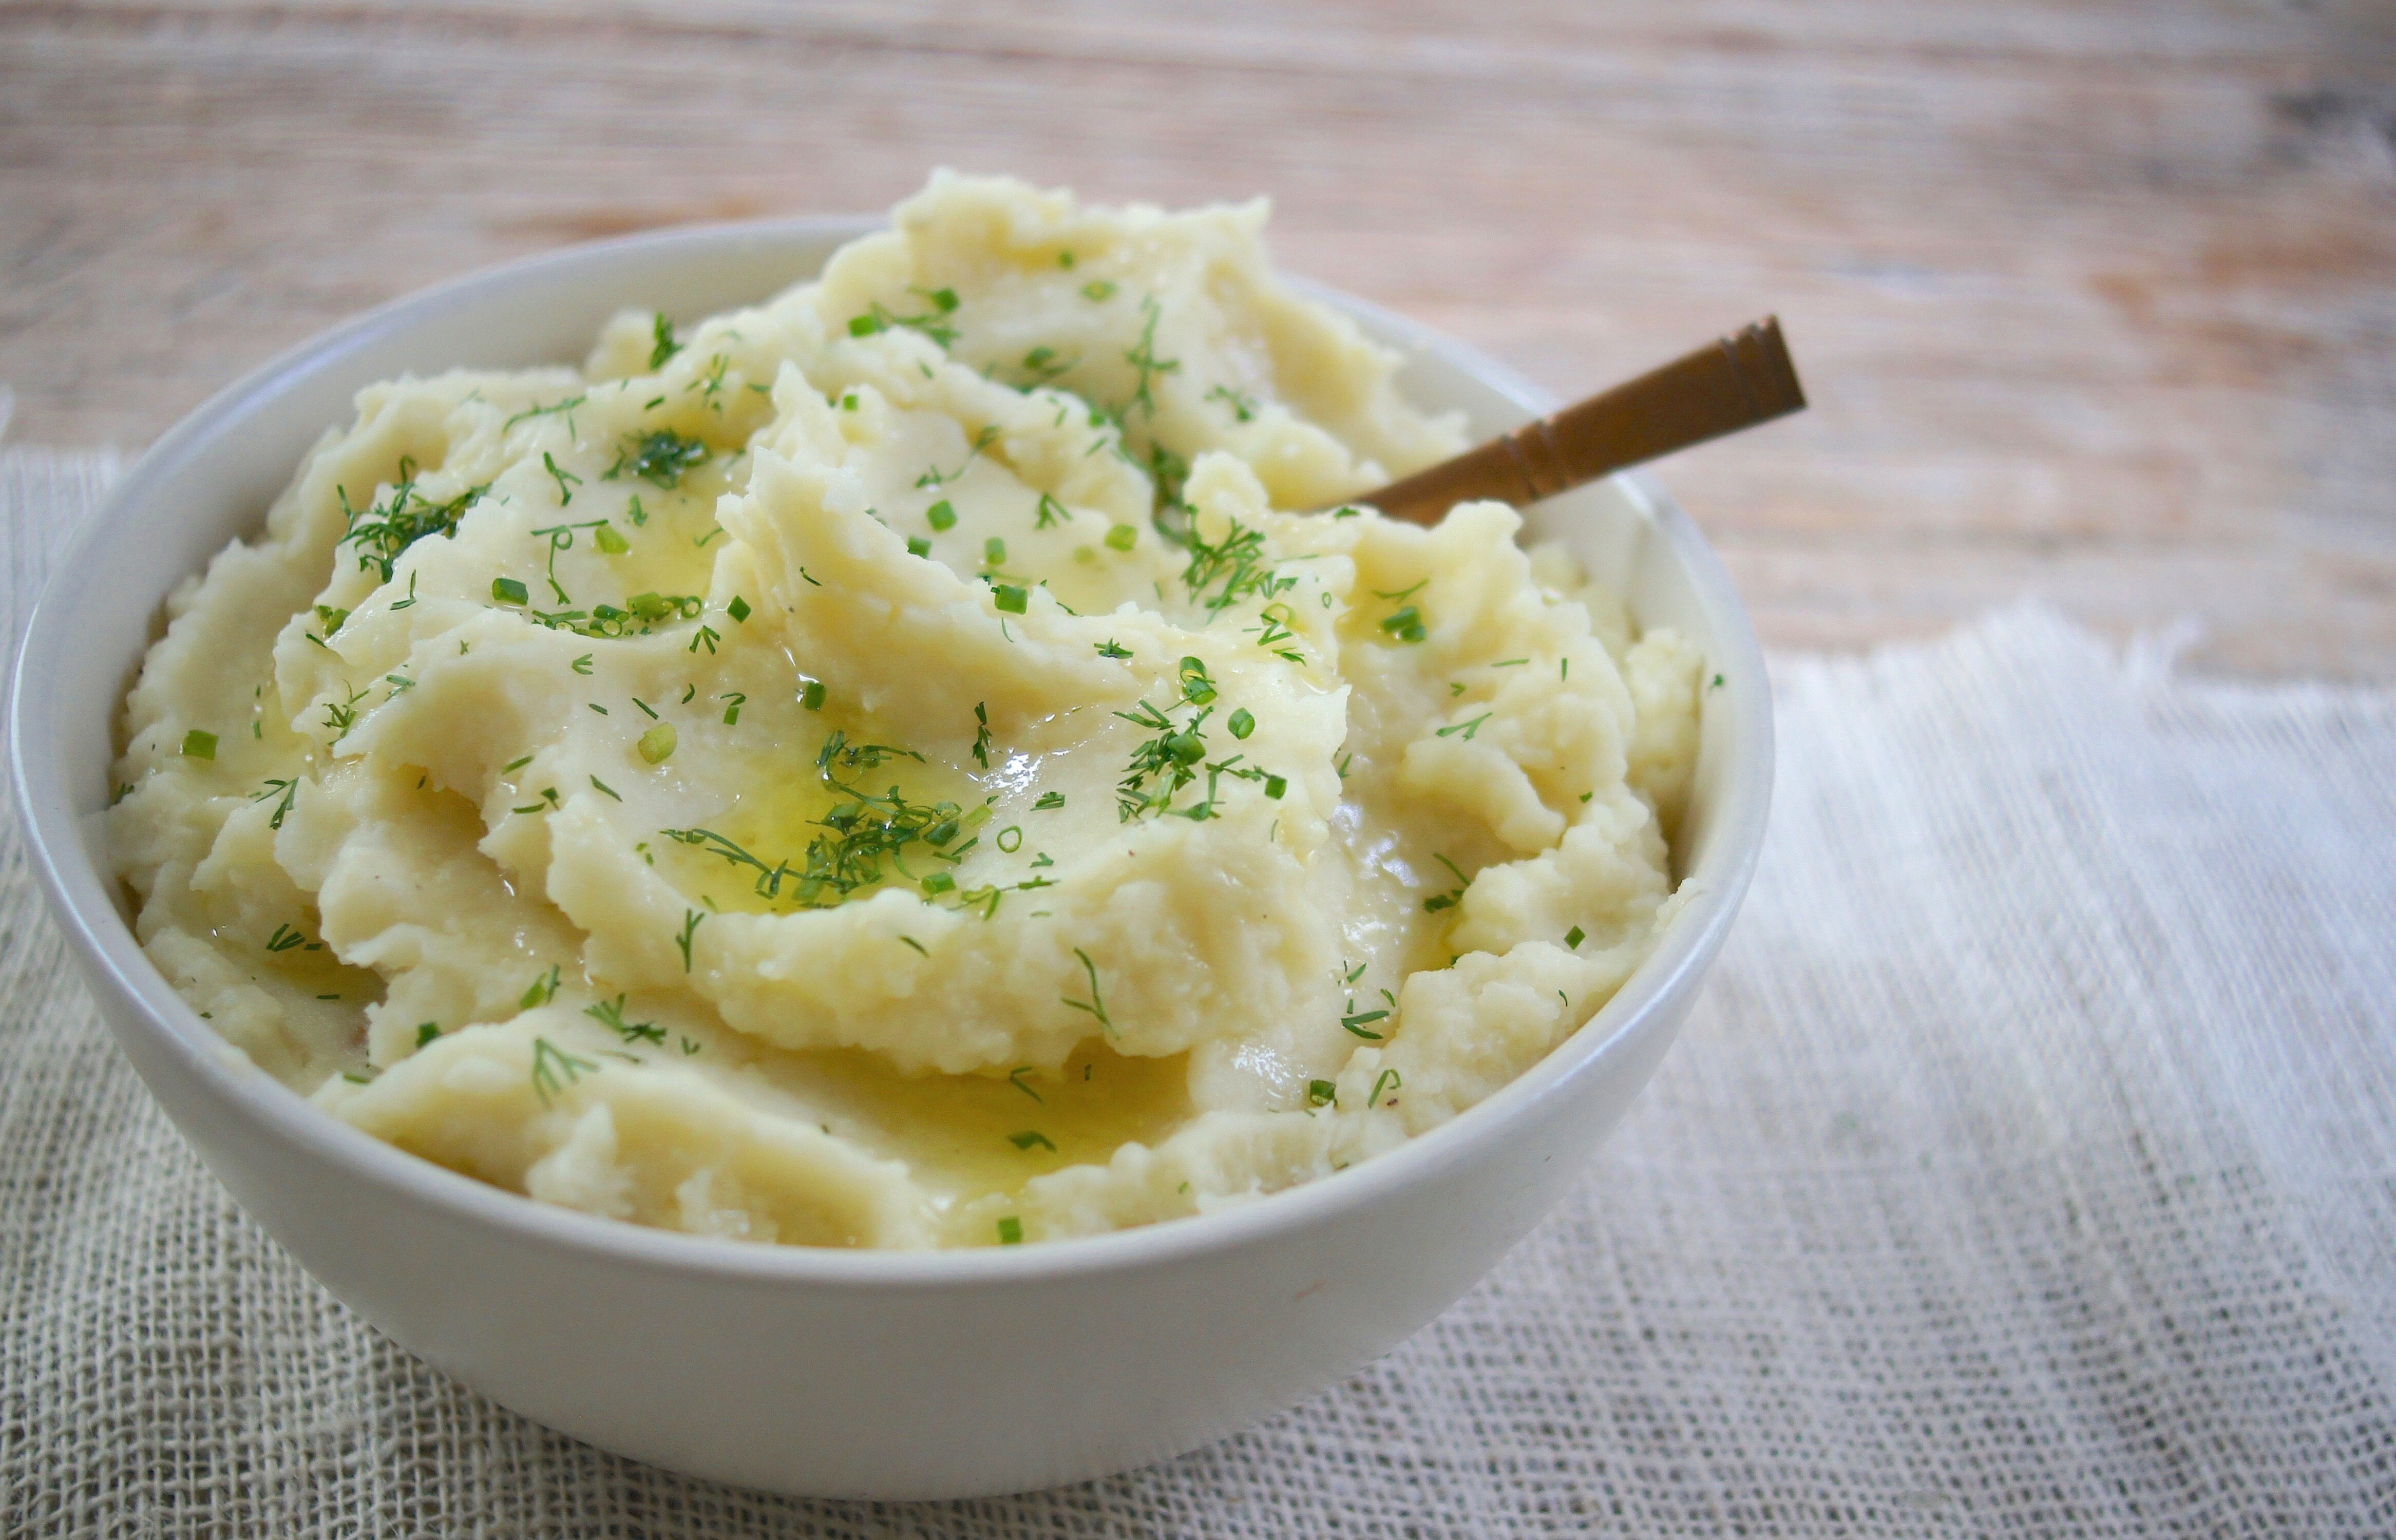 Olive Oil Mashed Potatoes
 Olive Oil Mashed Potatoes and Cauliflower a Healthy Vegan